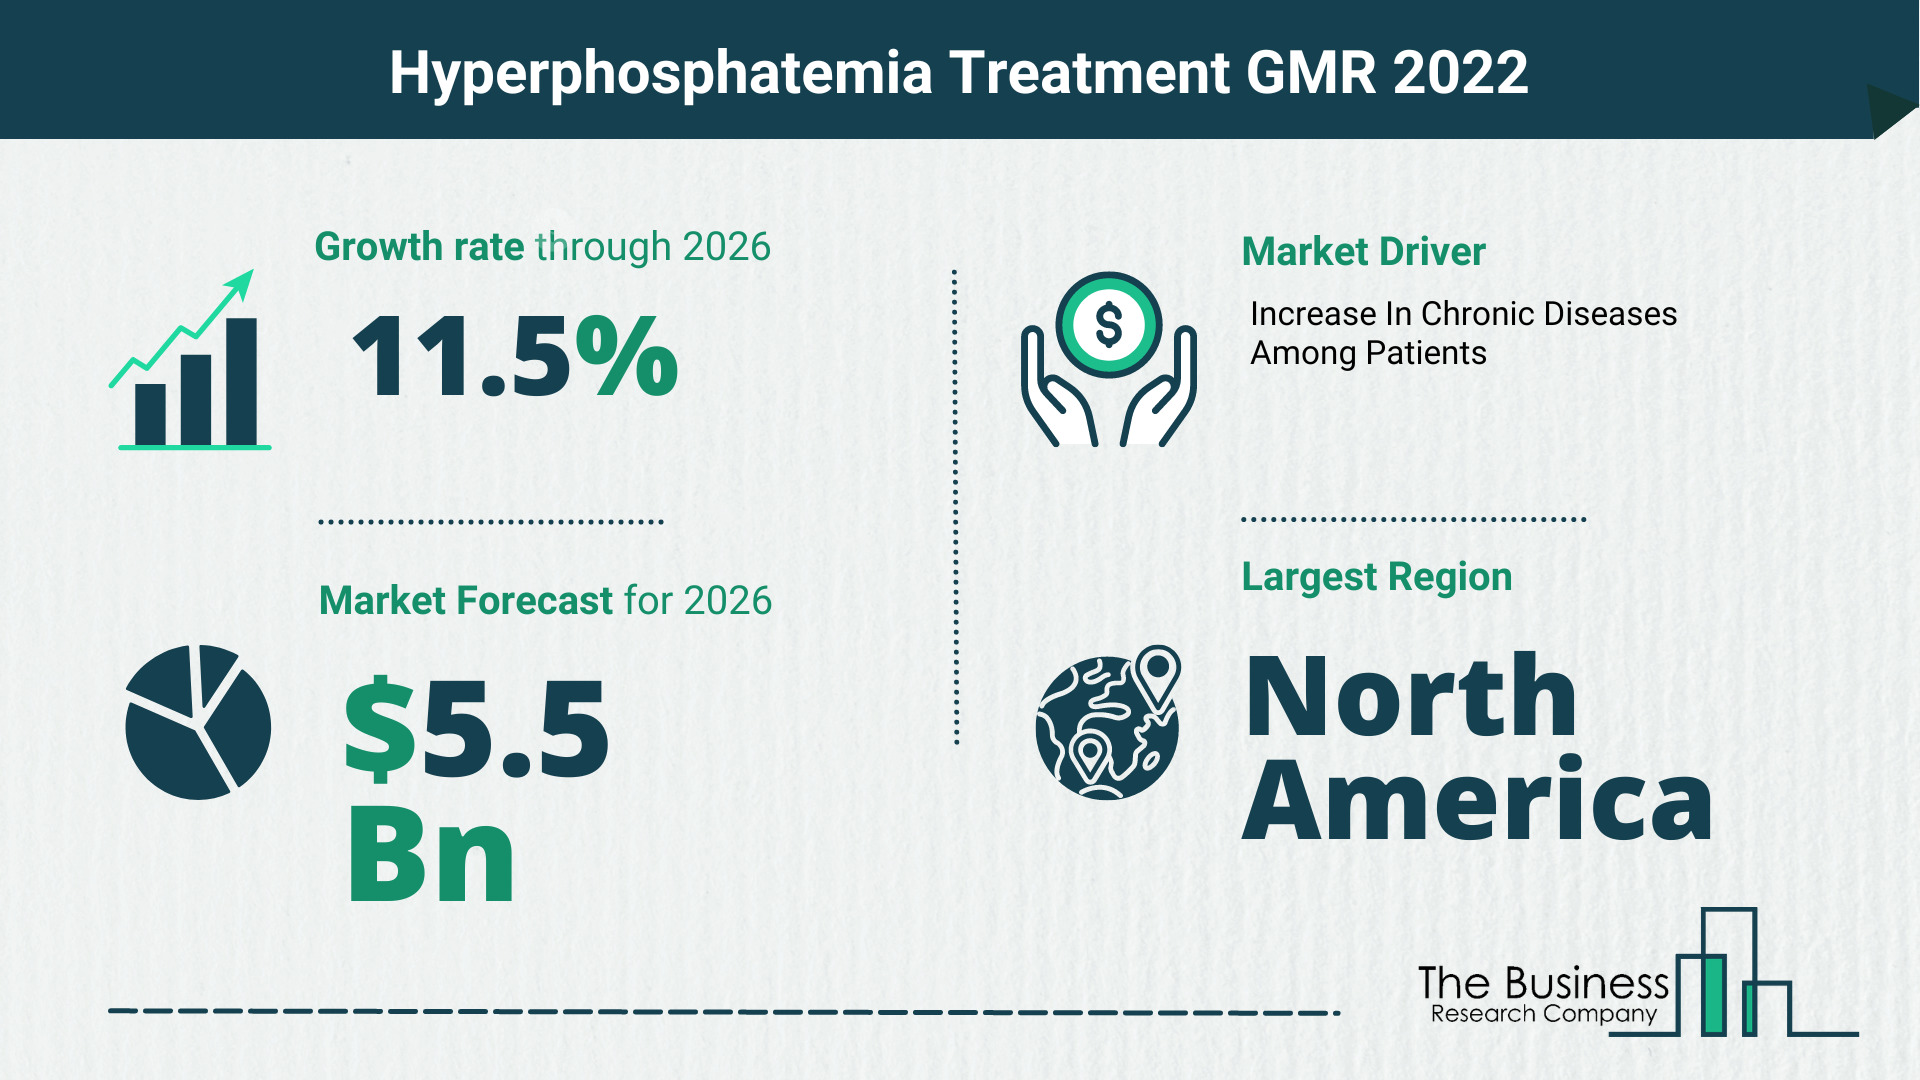 What Is The Hyperphosphatemia Treatment Market Overview In 2022?